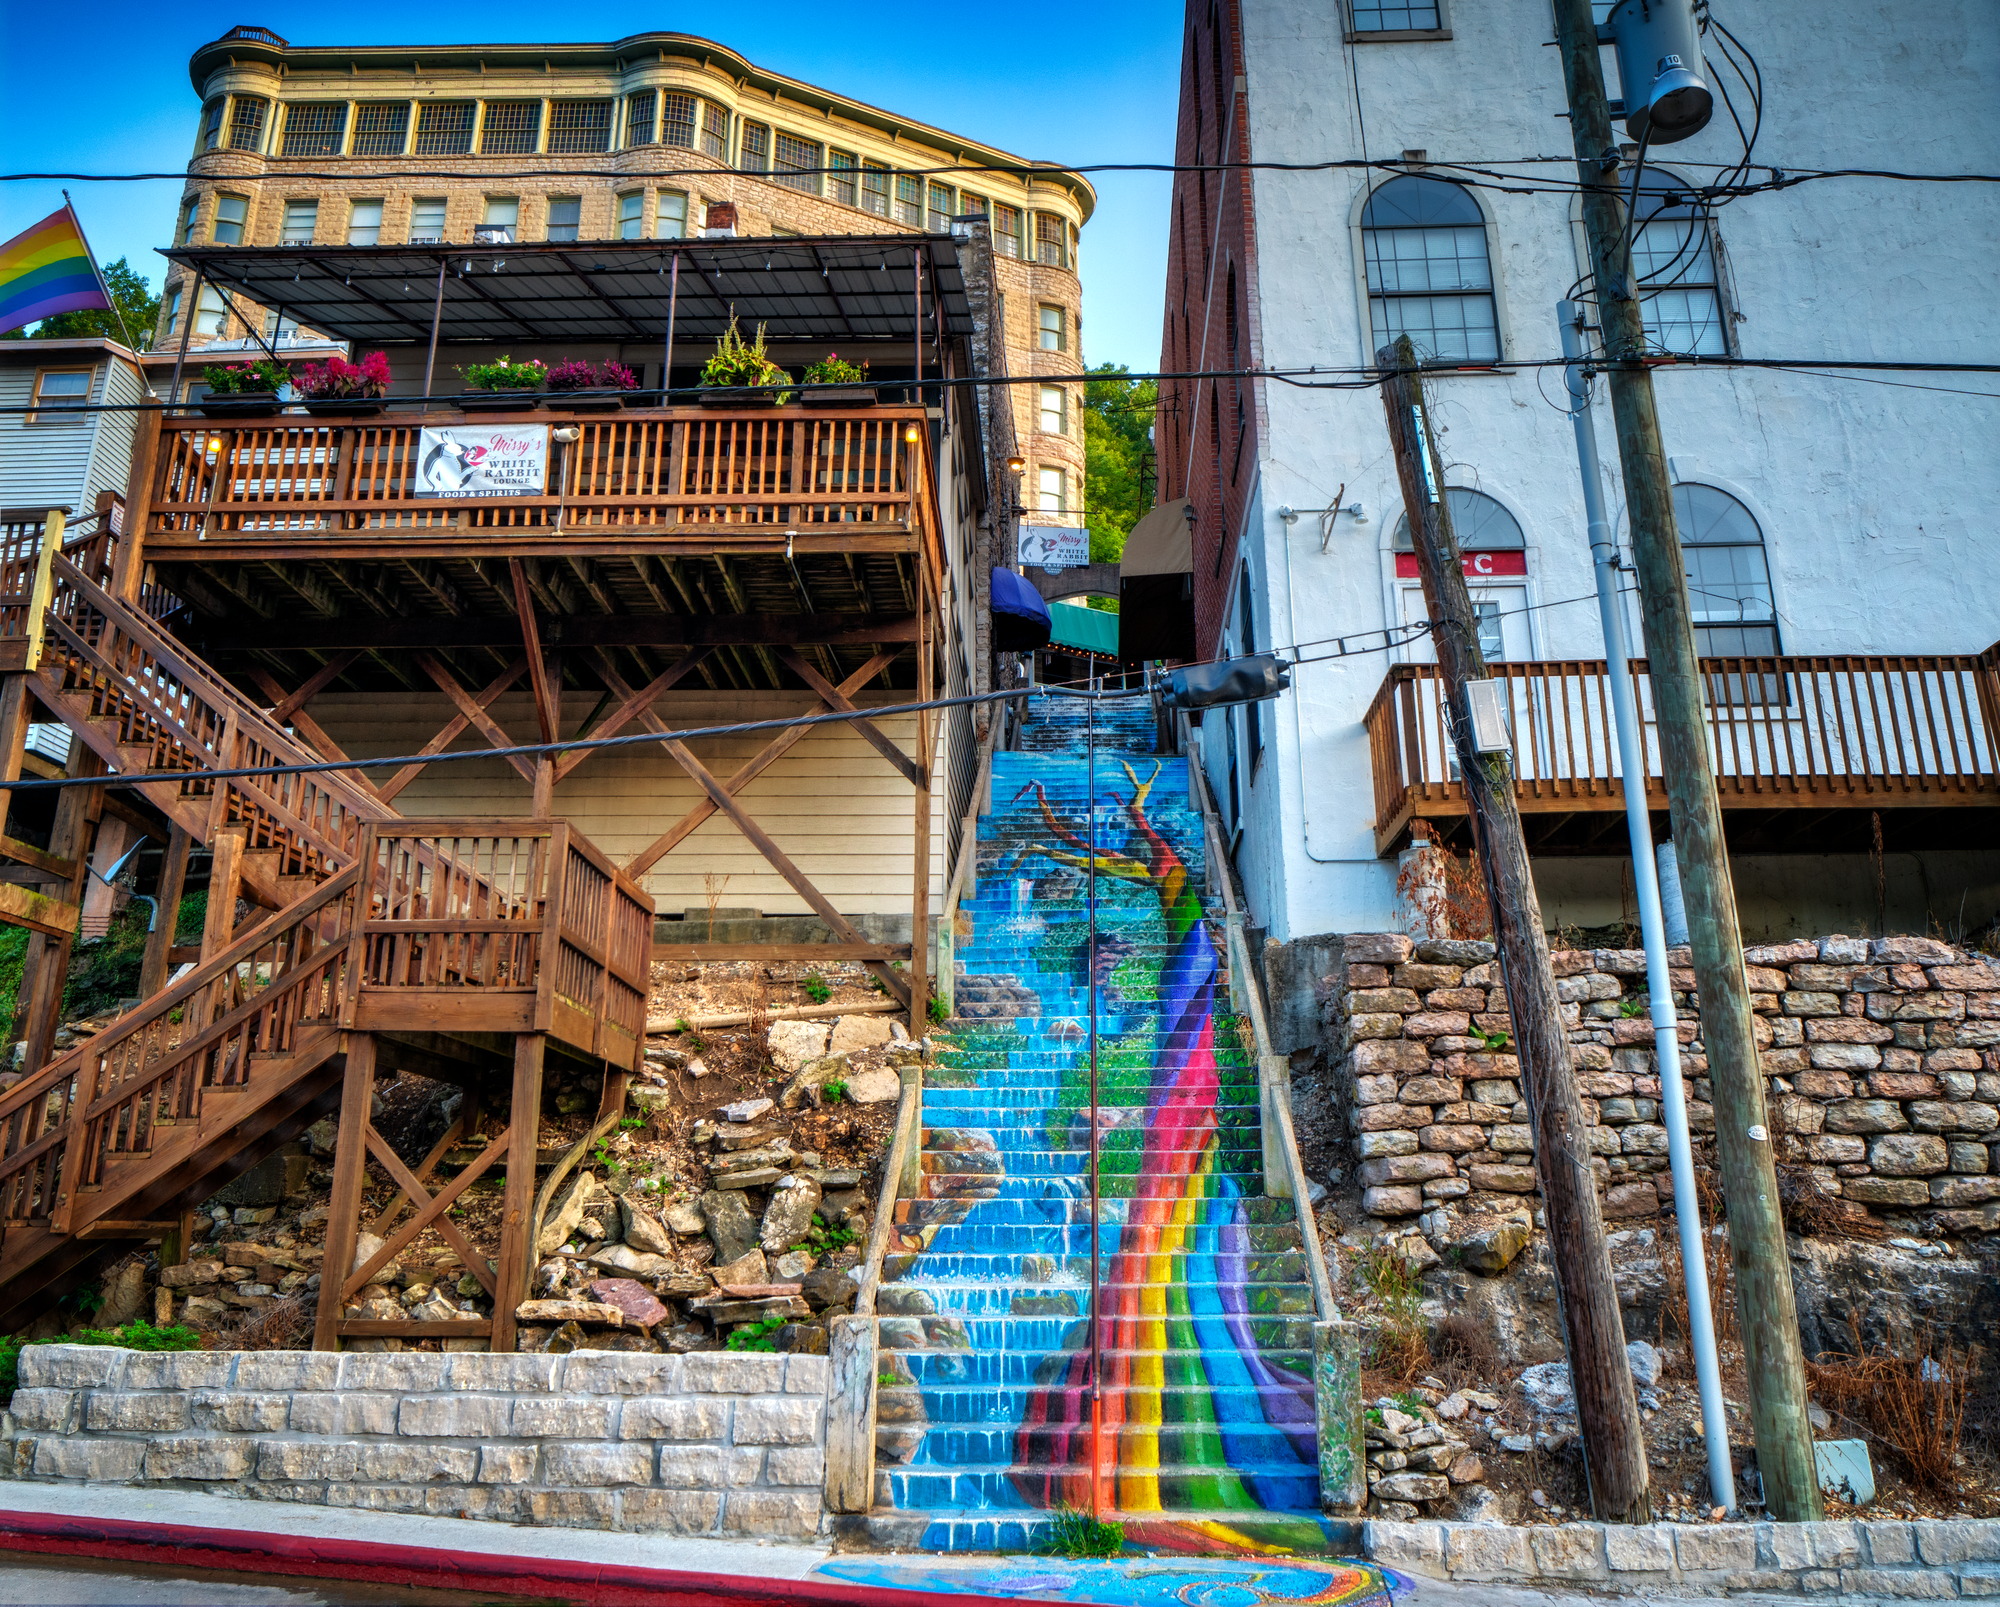 Featured image for “Top 9 Things That Make Eureka Springs “Curious, Indeed””